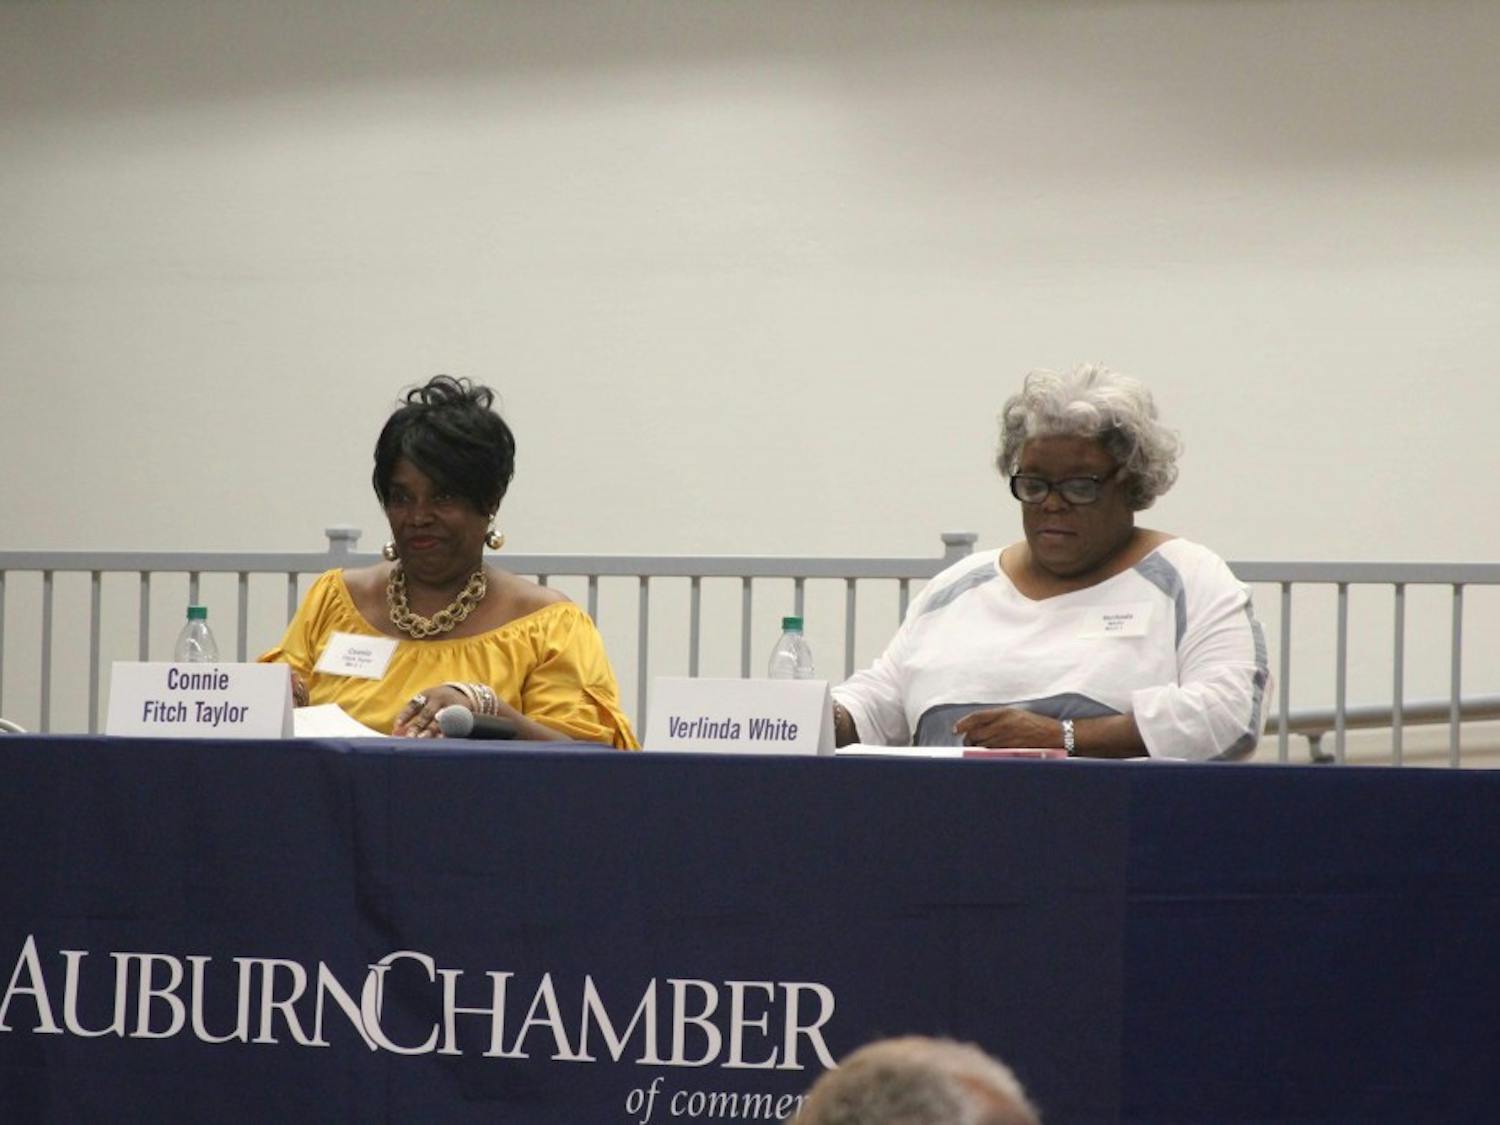 Auburn City Council Ward 1 candidates Connie Fitch Taylor (left) and Verlinda White (right) answered the audience's questions at a forum on Thursday night, Aug. 23, 2018, in Auburn, Ala.